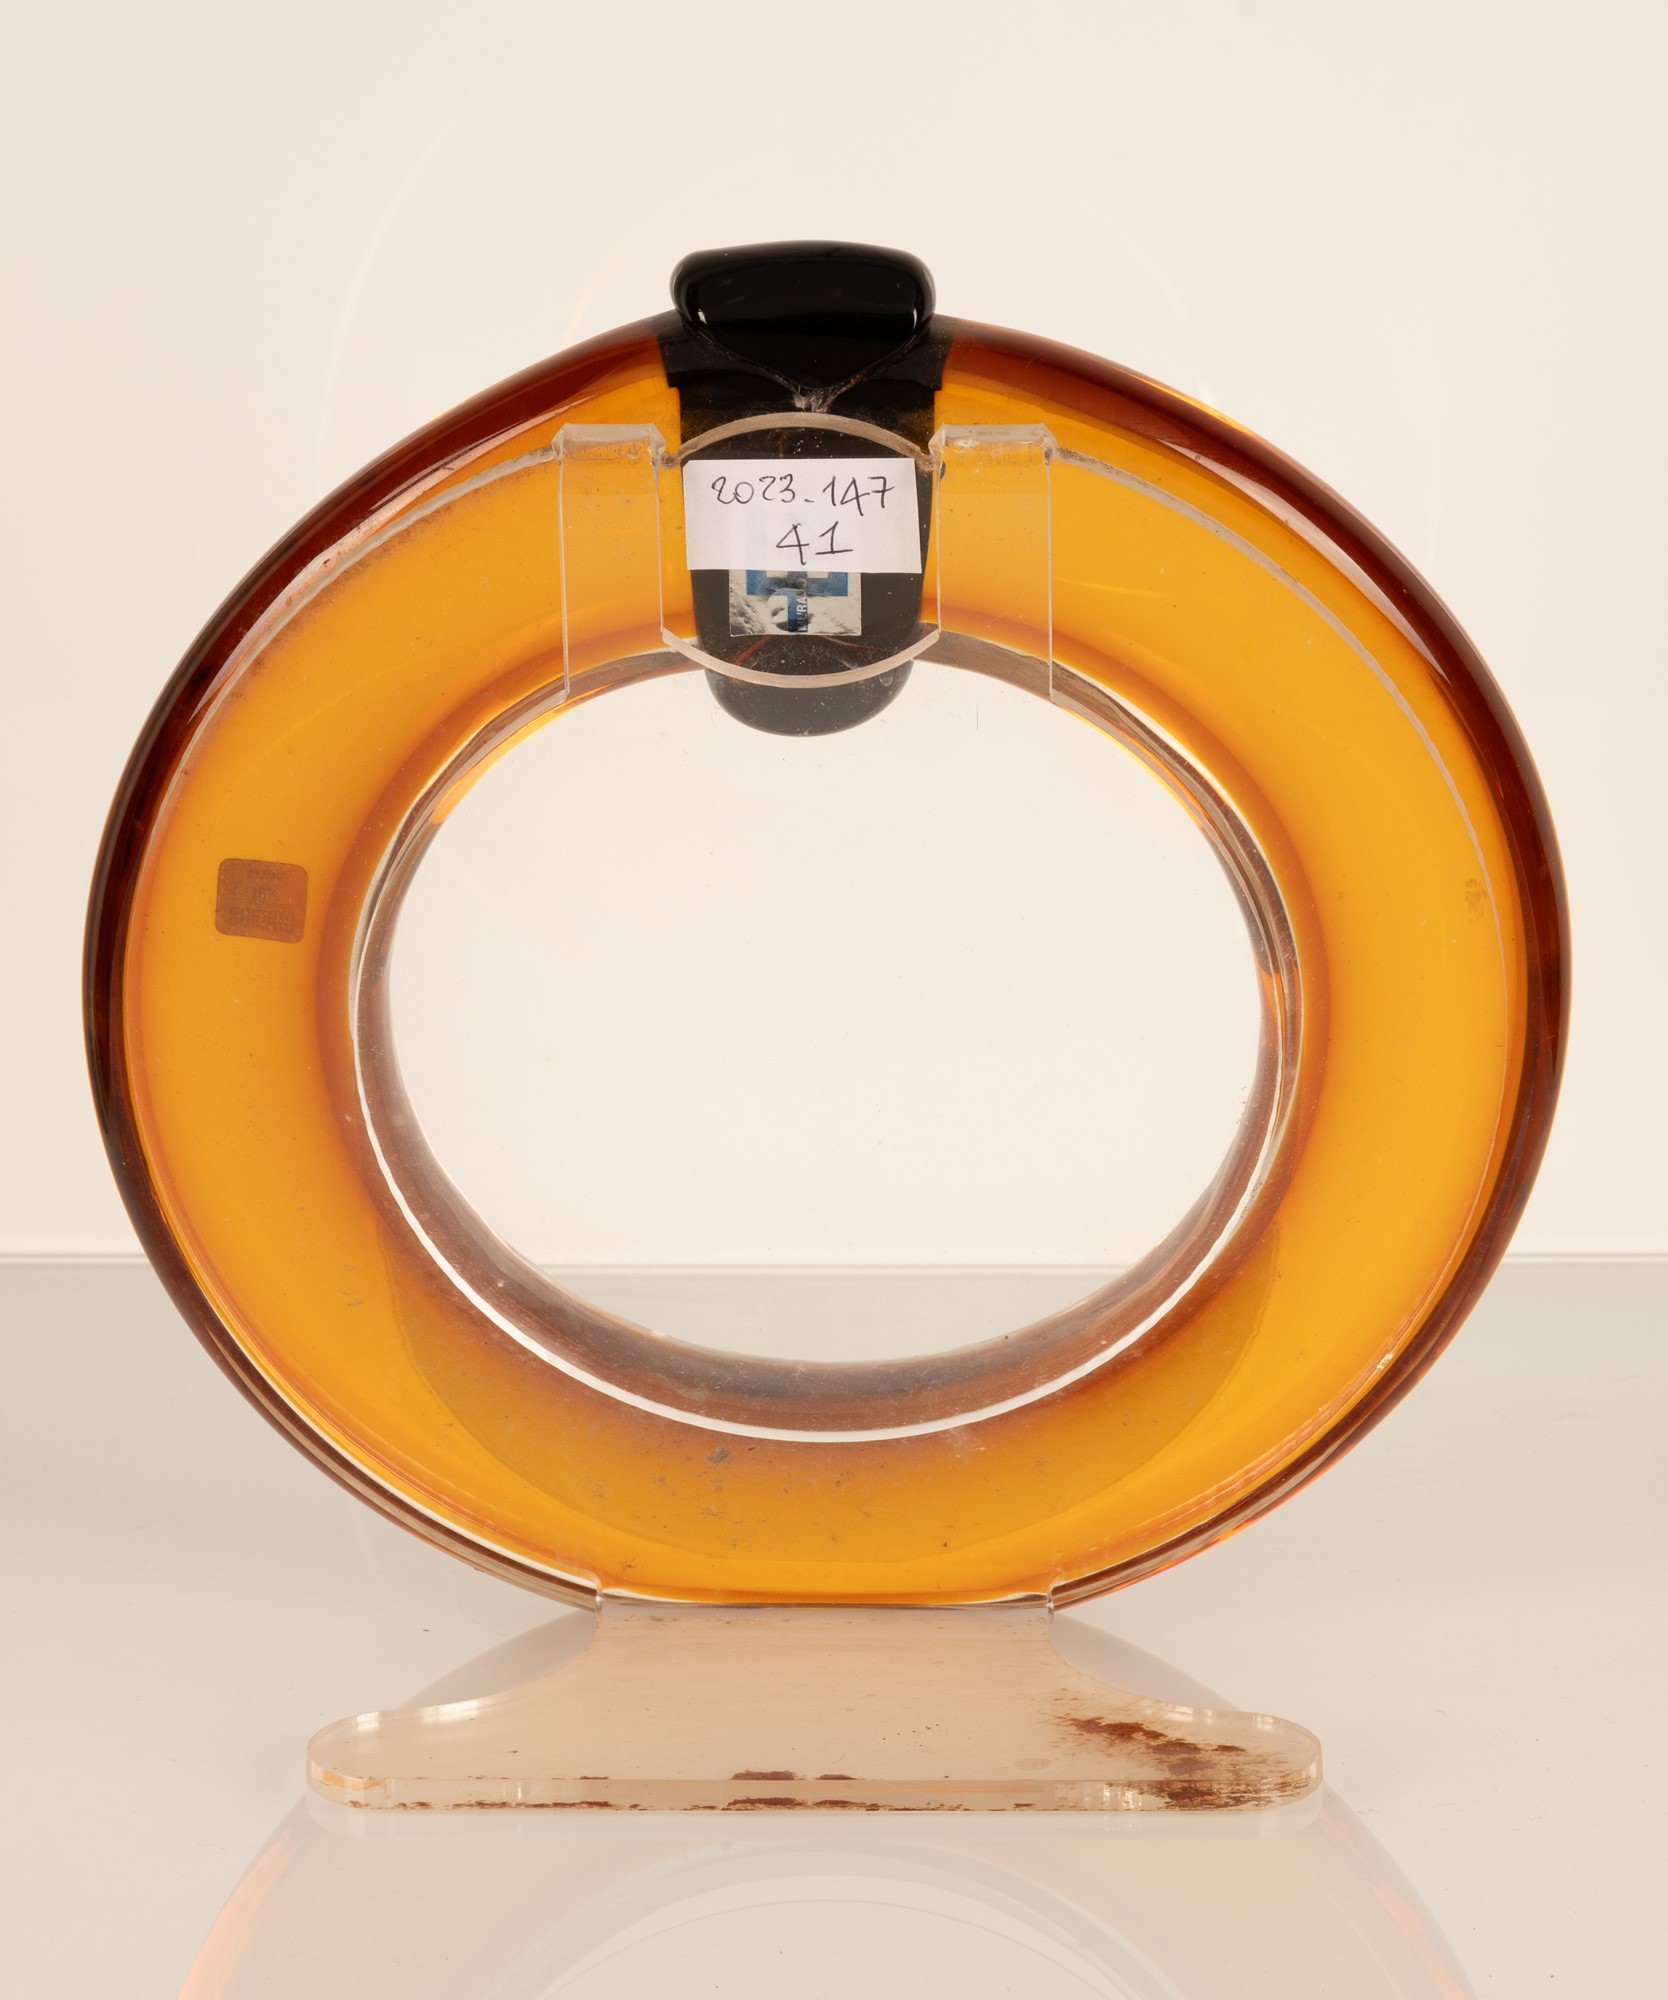 Vintage round photo frame in Murano glass in shades of Amber - Image 10 of 19